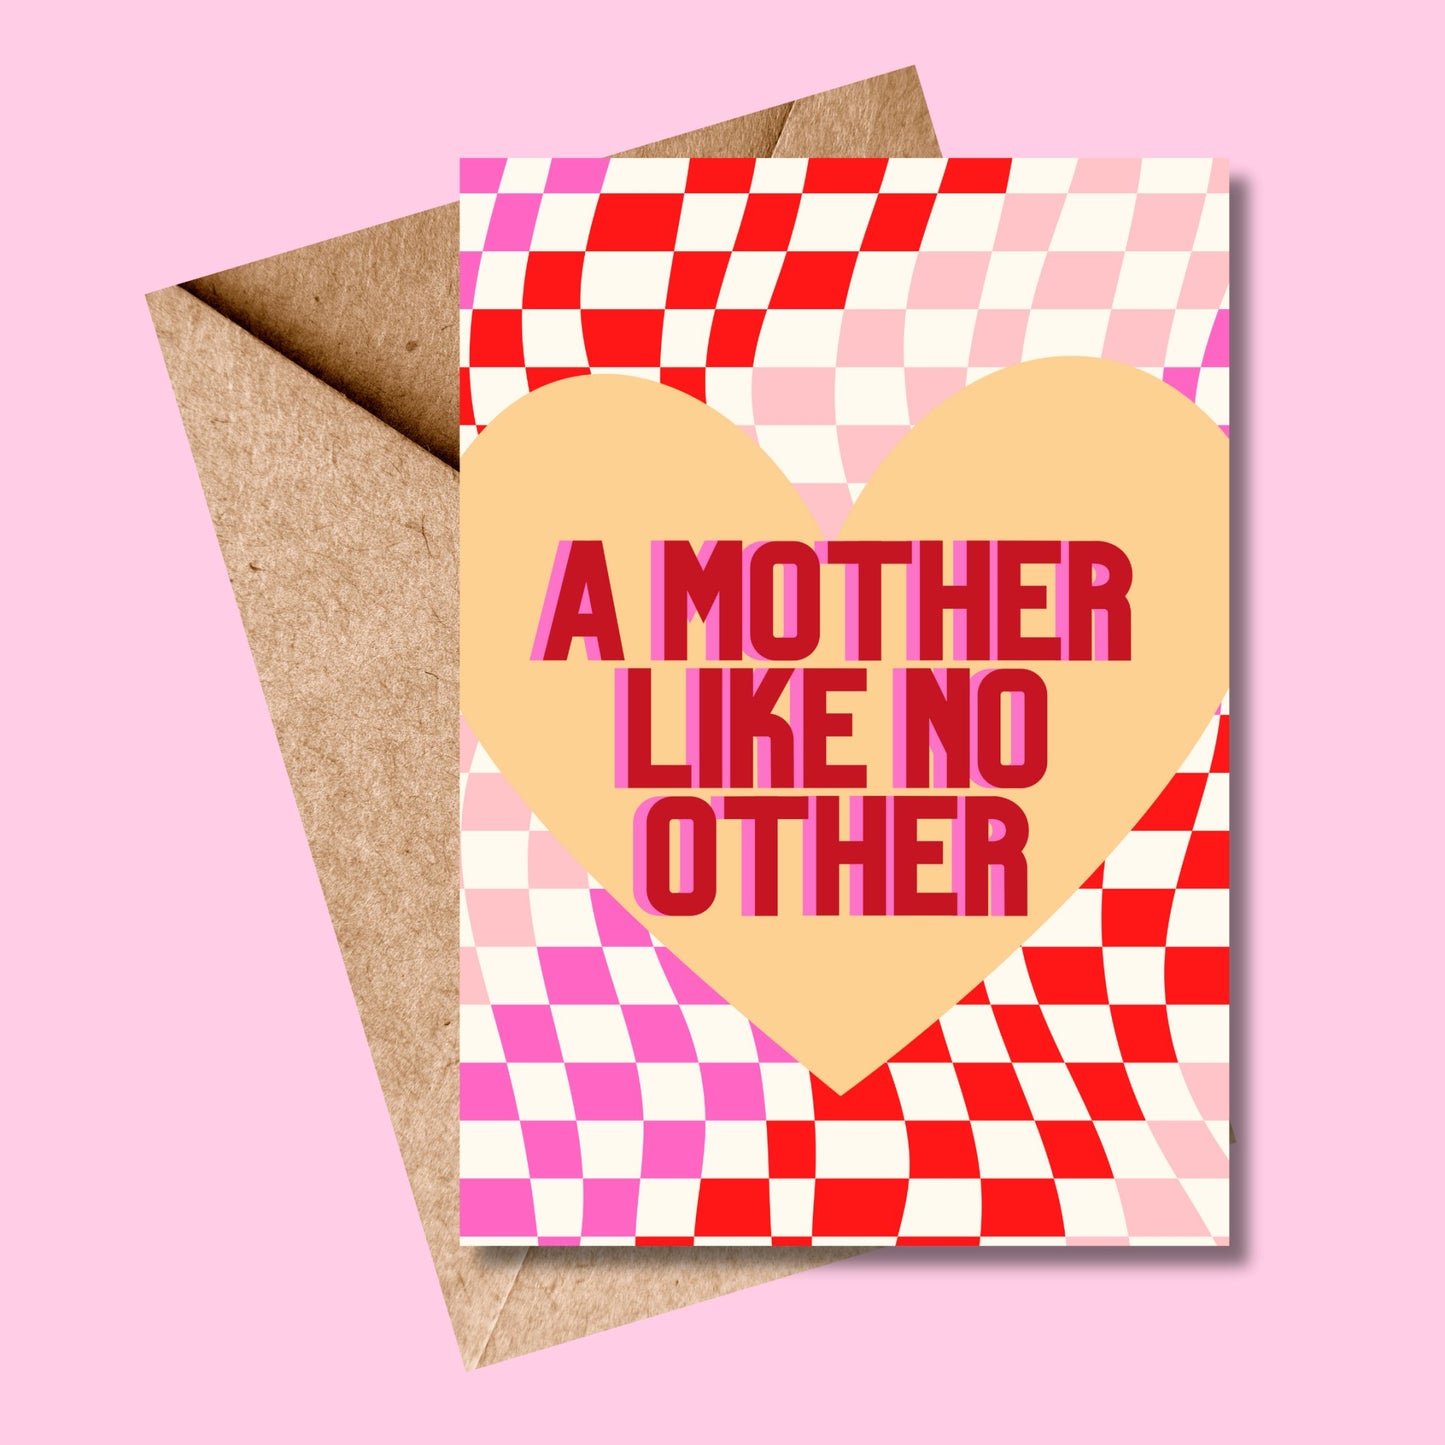 A mother like no other (5x7” print/card) - Utter tutt